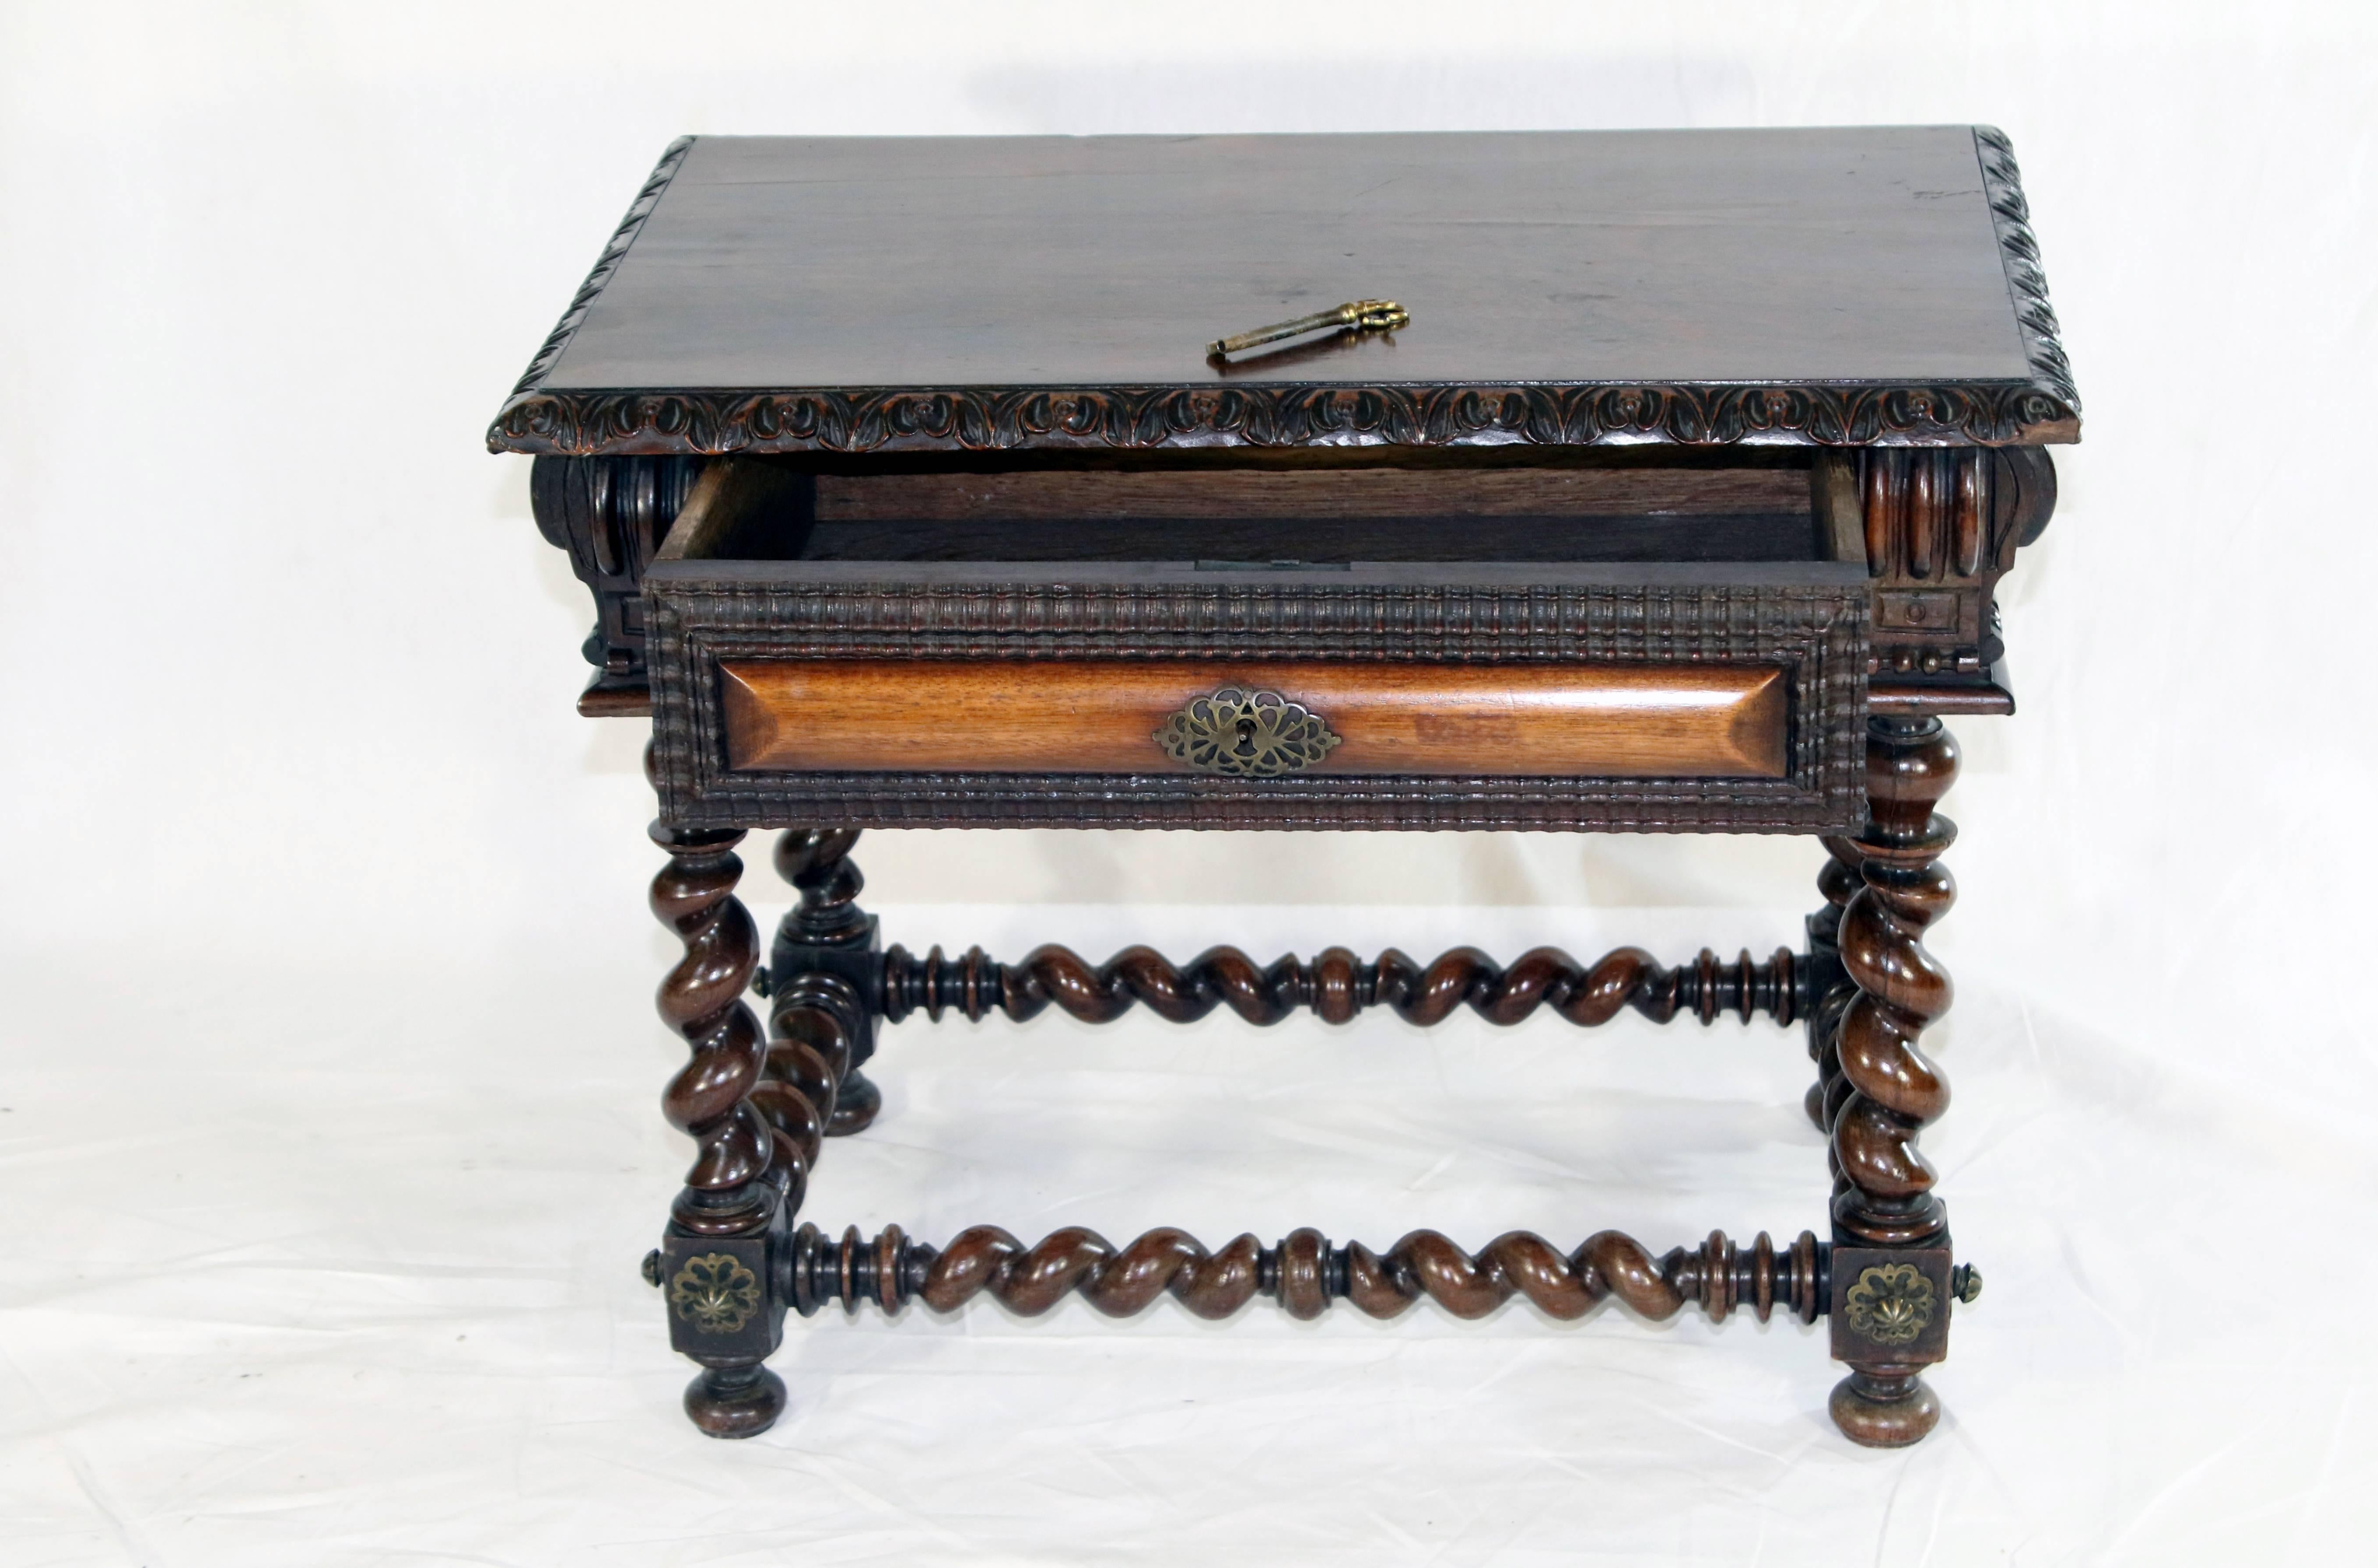 lndo-Portuguese low table with single drawer (key included) made from rare palisander wood (Brazilian rosewood) displaying superb patina and dramatic graining on turned barley twist legs and perimeter stretchers. The single drawer is cleverly